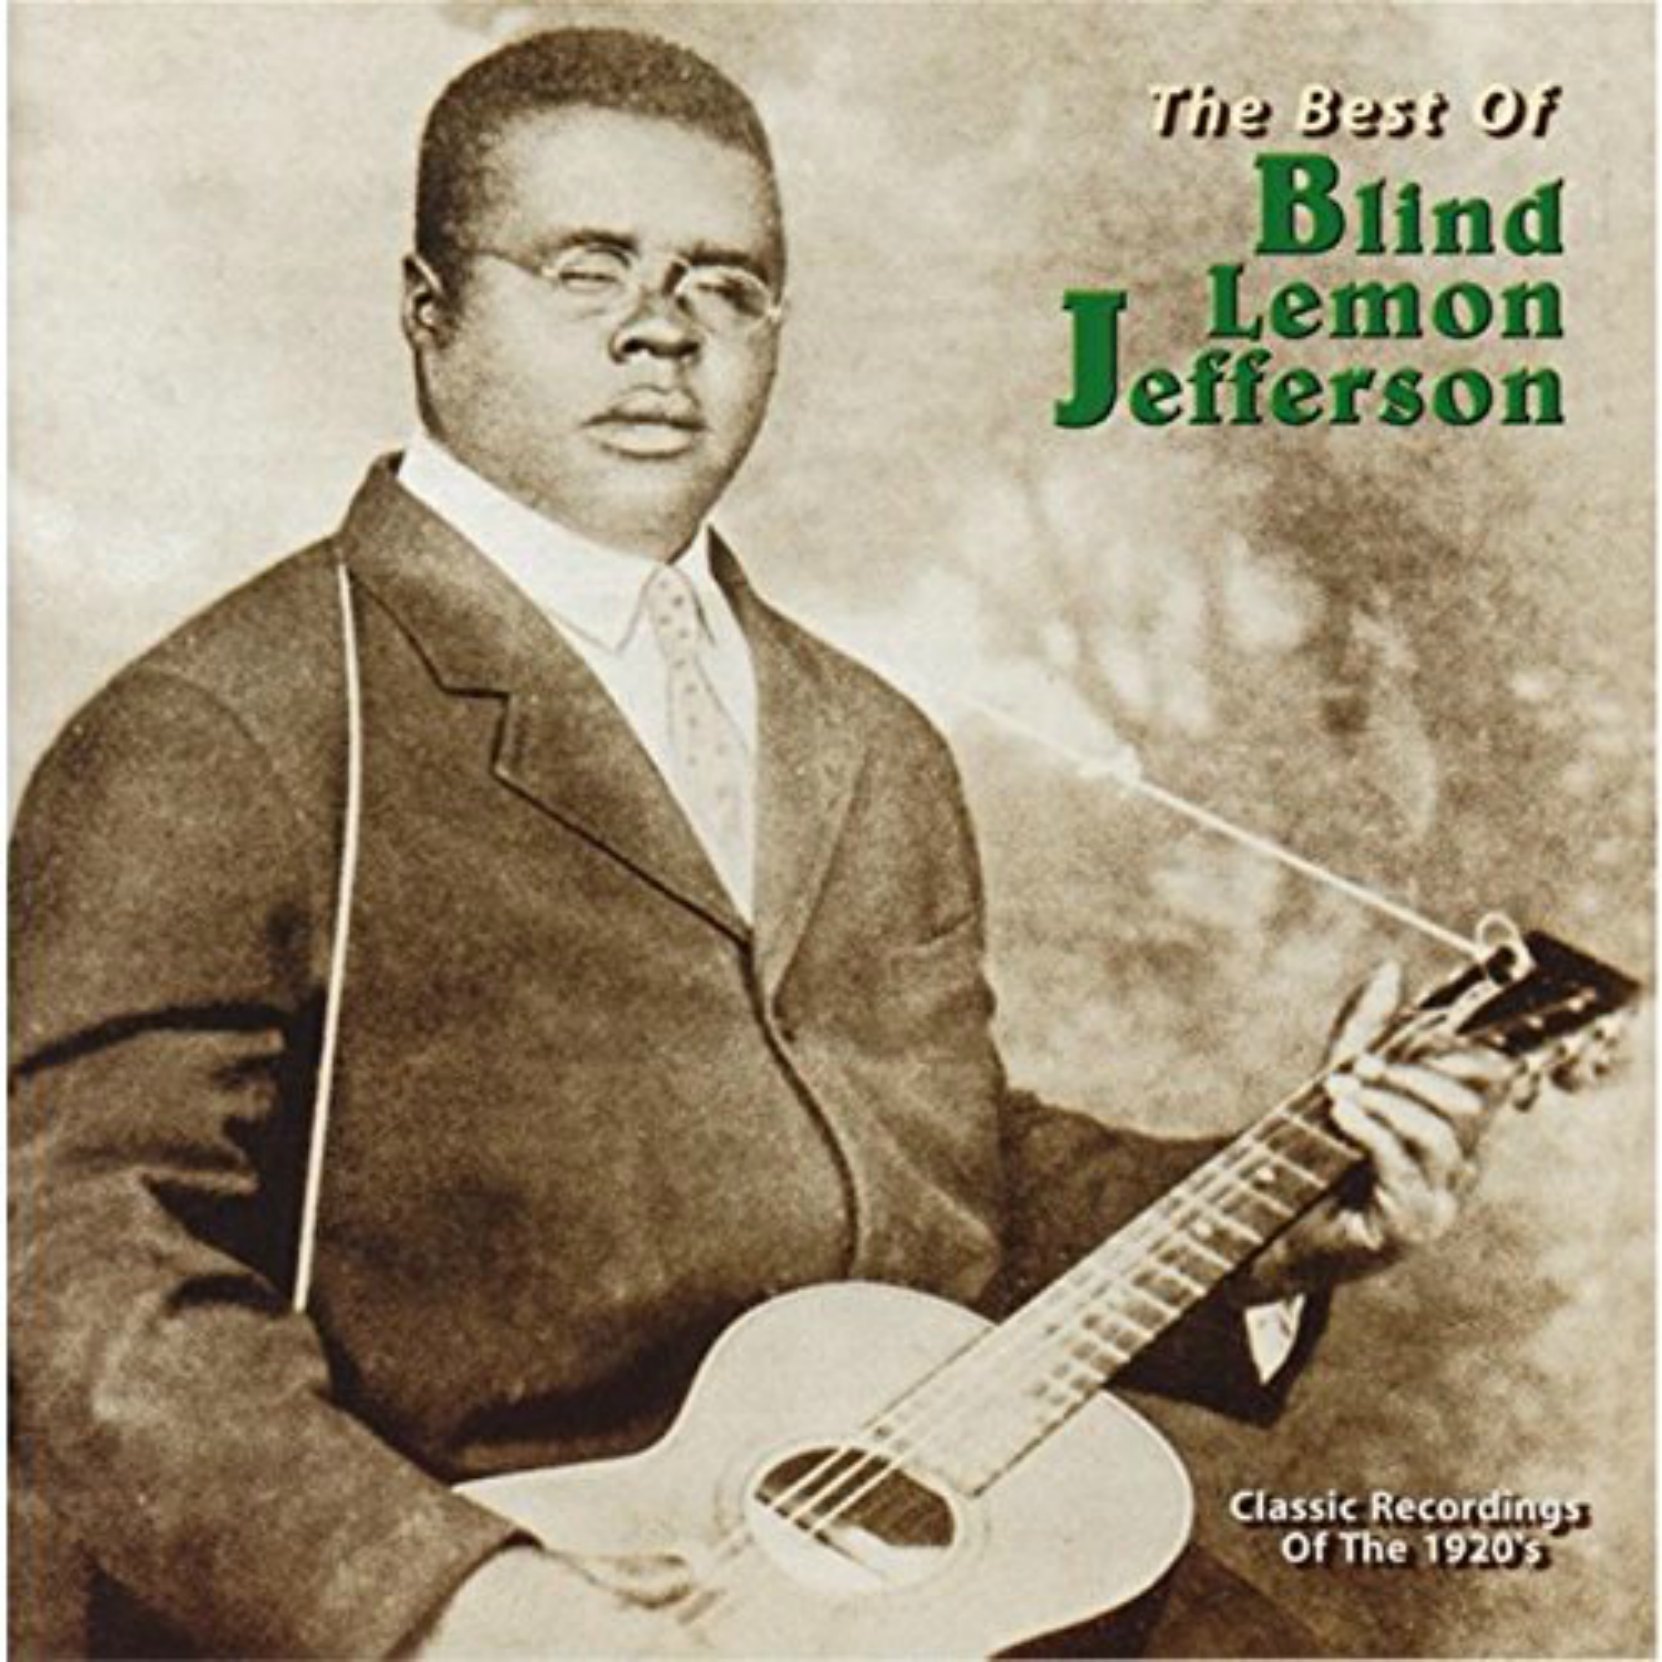 CD cover, The Best of Blind Lemon Jefferson, released on Yazoo Records